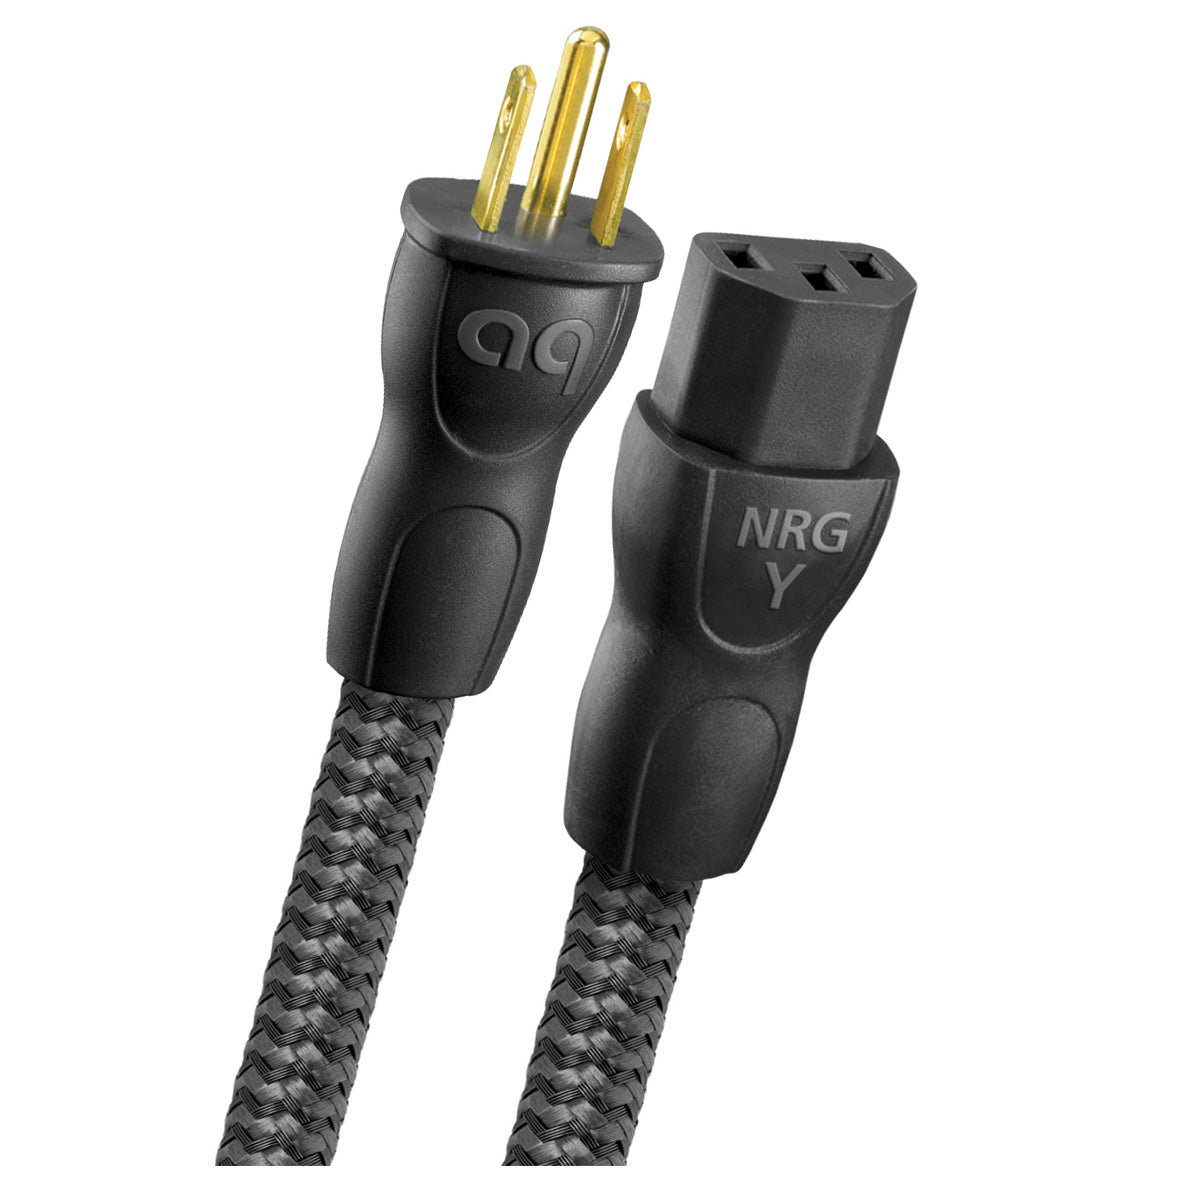 AudioQuest NRG-Y3 Low-Distortion 3-Pole AC Power Cable - 6.56' (2m)